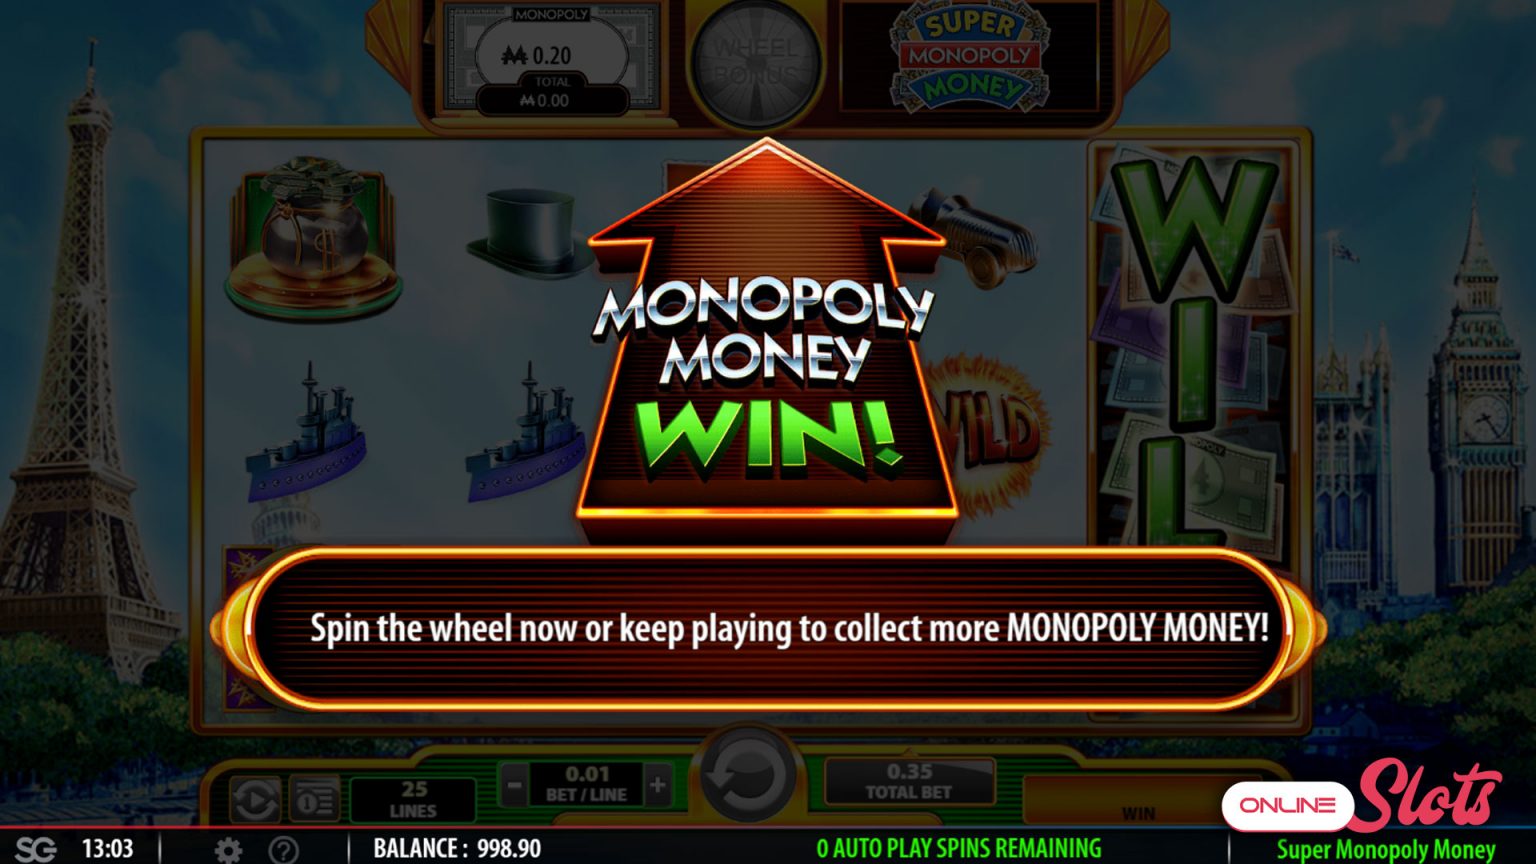 monopoly slots free coins iphone